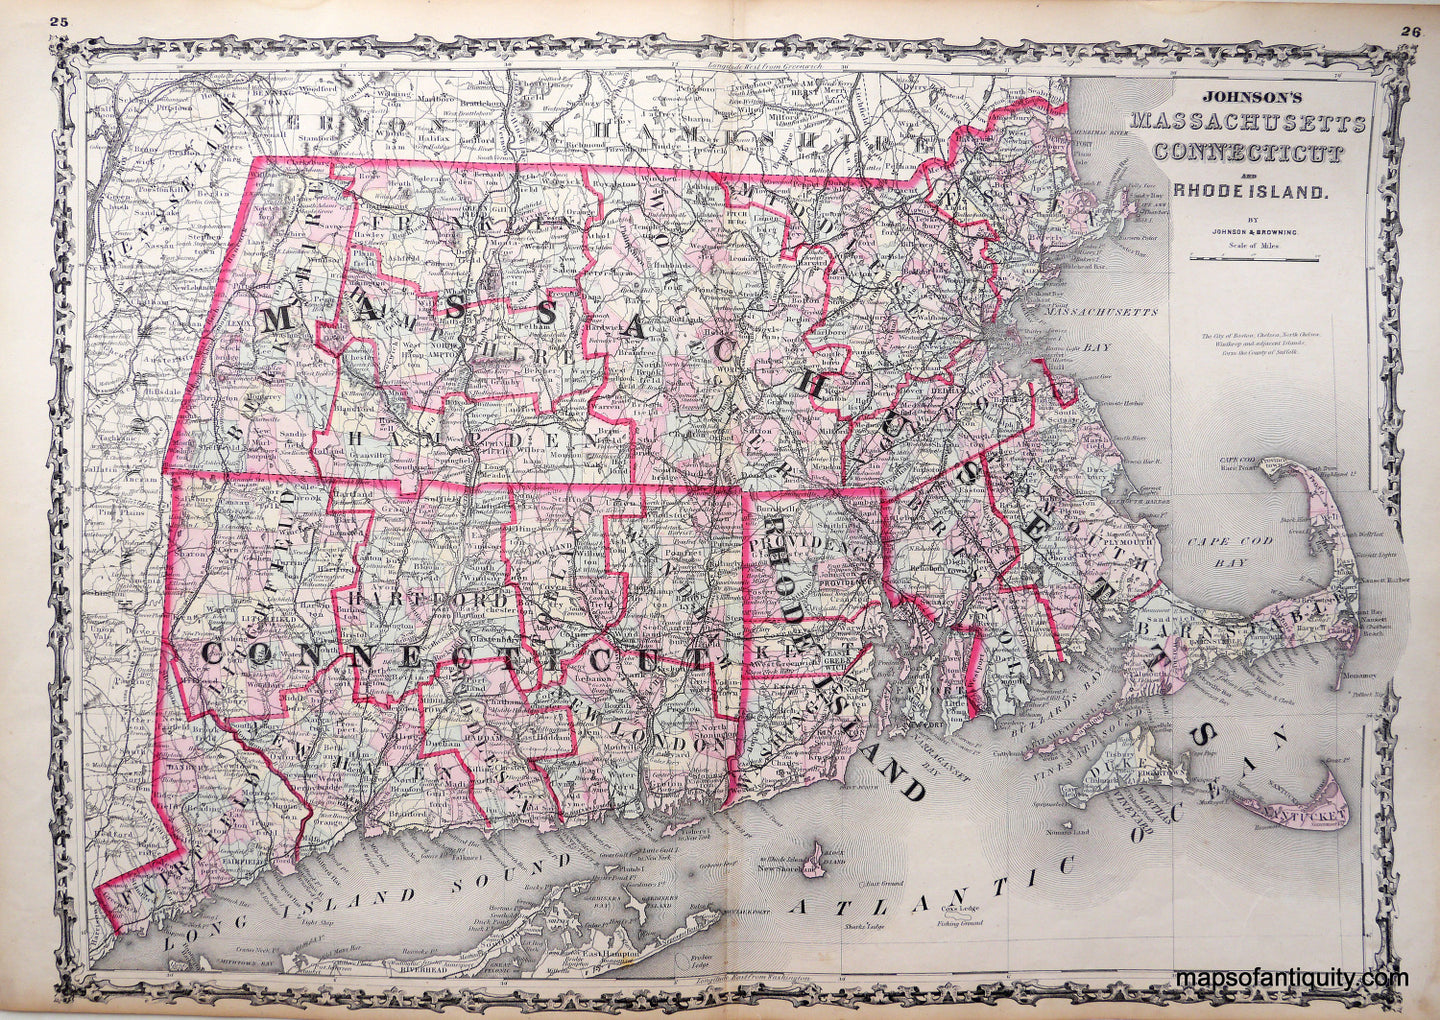 Antique-Hand-Colored-Map-Johnson's-Massachusetts-Connecticut-and-Rhode-Island-New-England-Northeast-1861-Johnson-and-Browning-Maps-Of-Antiquity